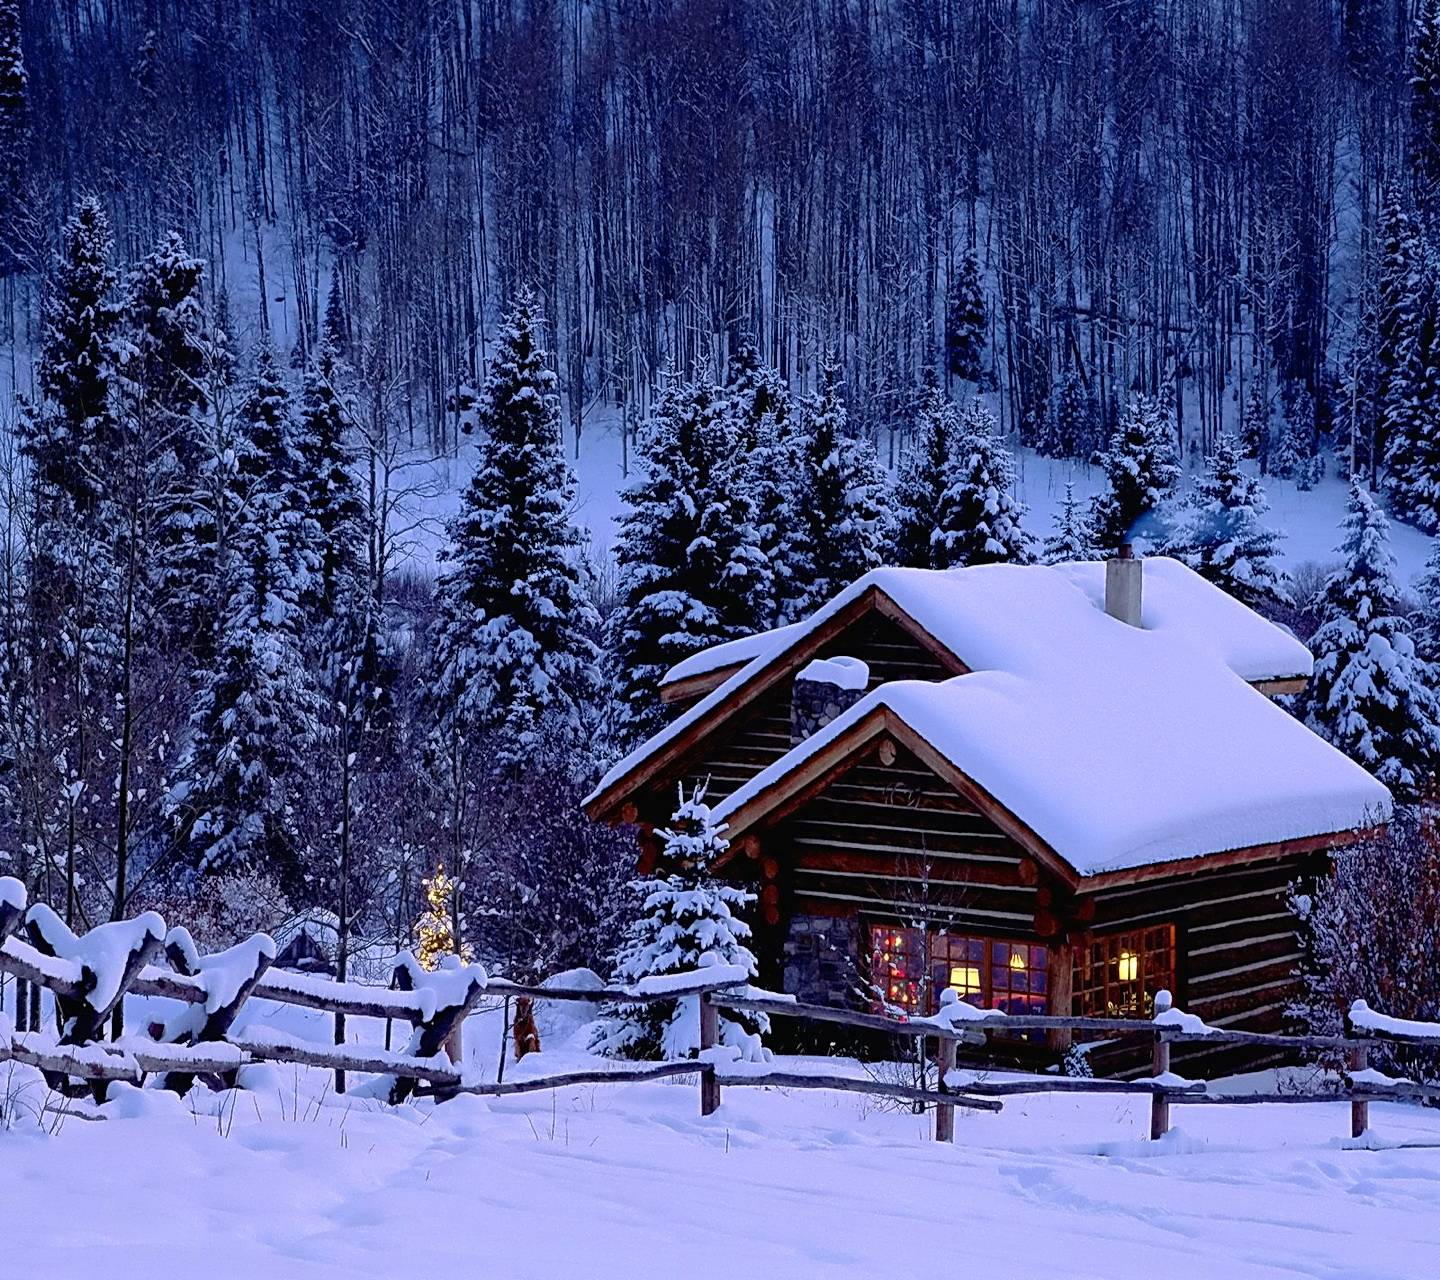 Snowy Christmas Wallpapers 4k Hd Snowy Christmas Backgrounds On